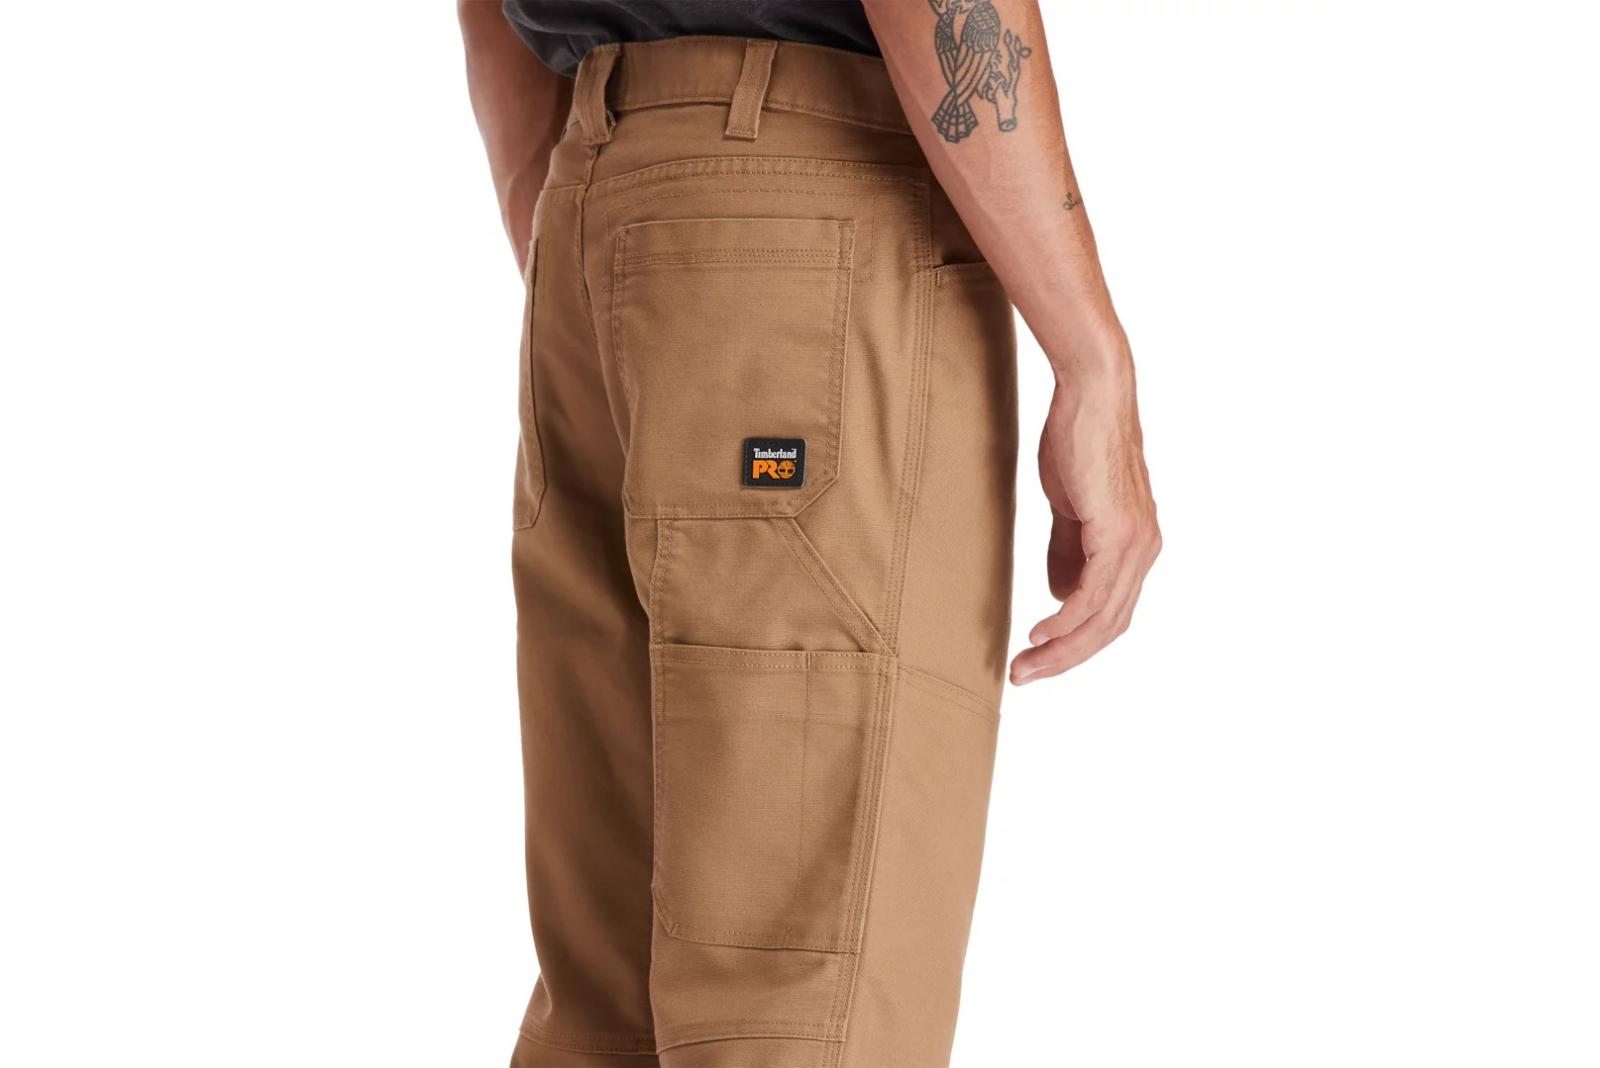 Timberland PRO Men's 8 Series Utility Pant w/ Knee Overlay